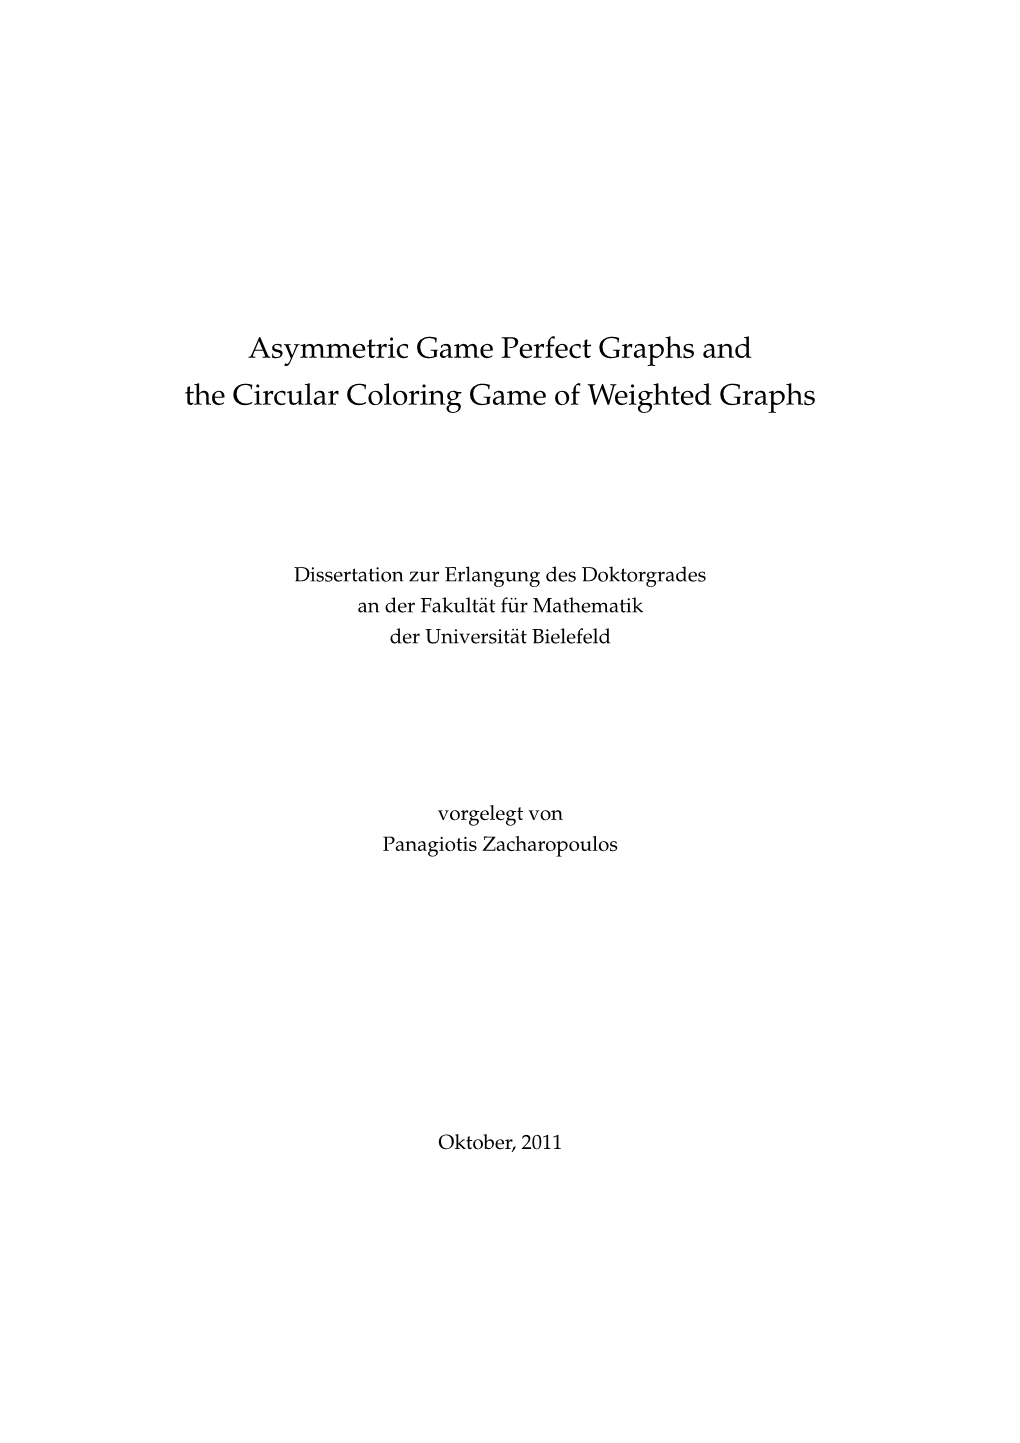 Asymmetric Game Perfect Graphs and the Circular Coloring Game of Weighted Graphs